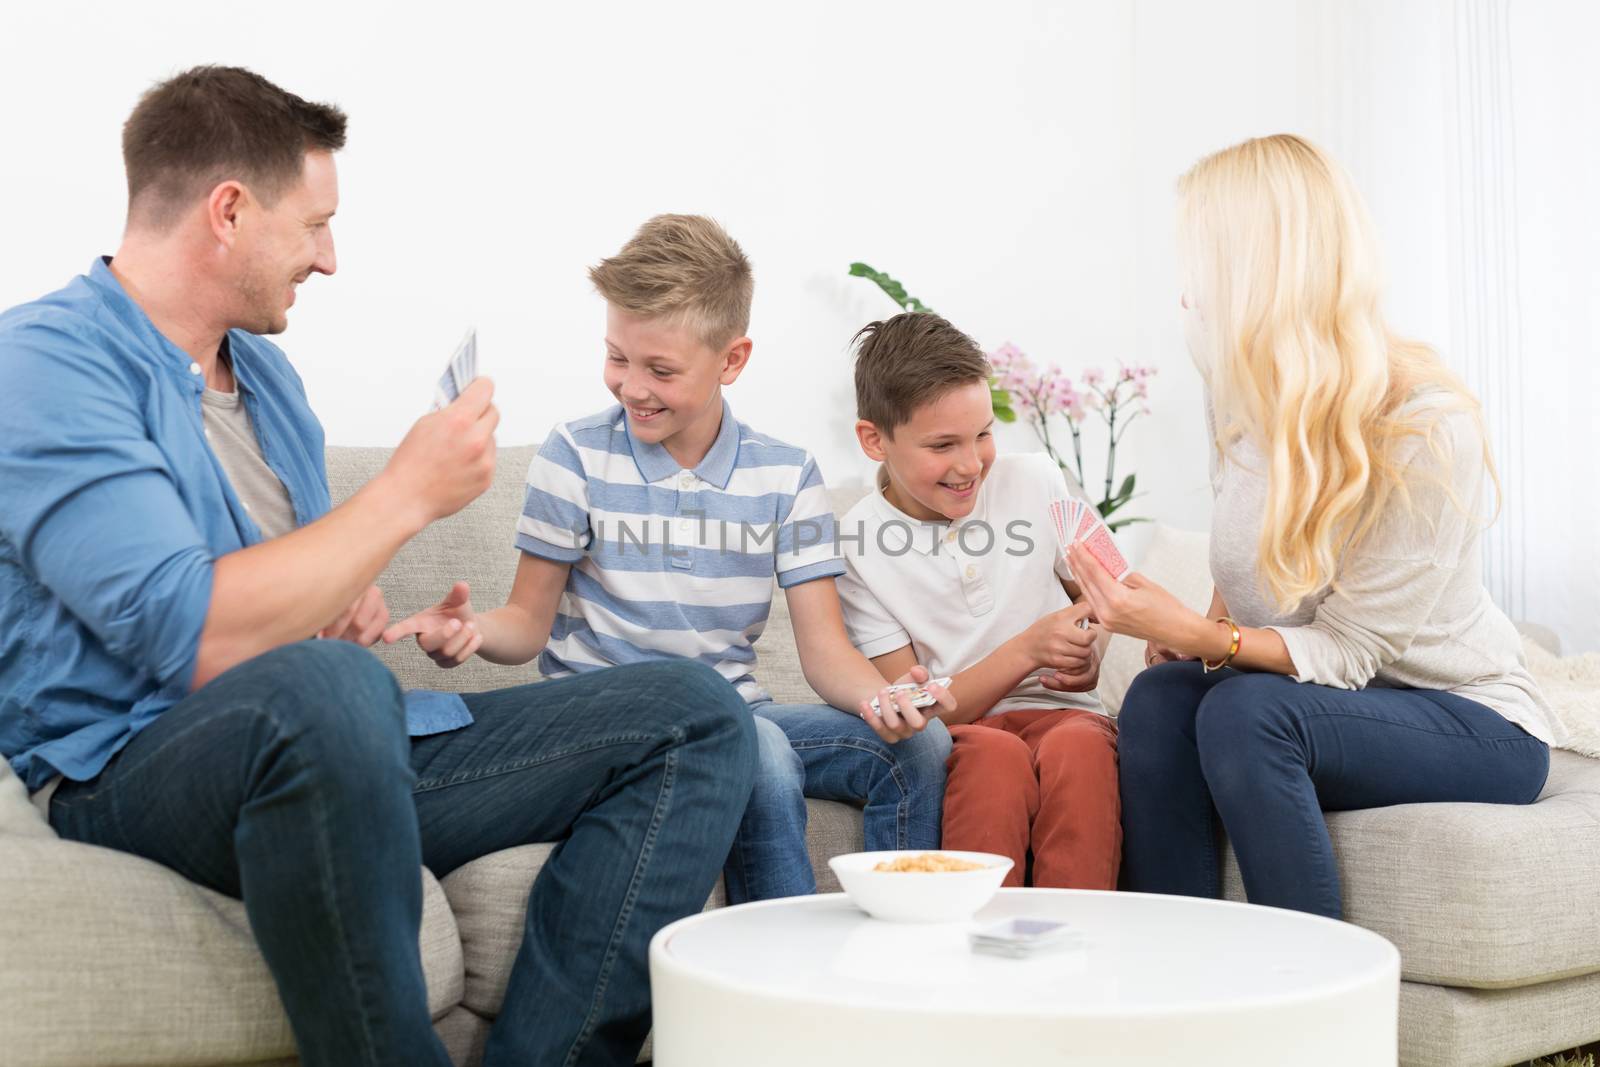 Happy young family playing card game on living room sofa at home. Spending quality leisure time with children and family concept. Cards are generic and debranded.